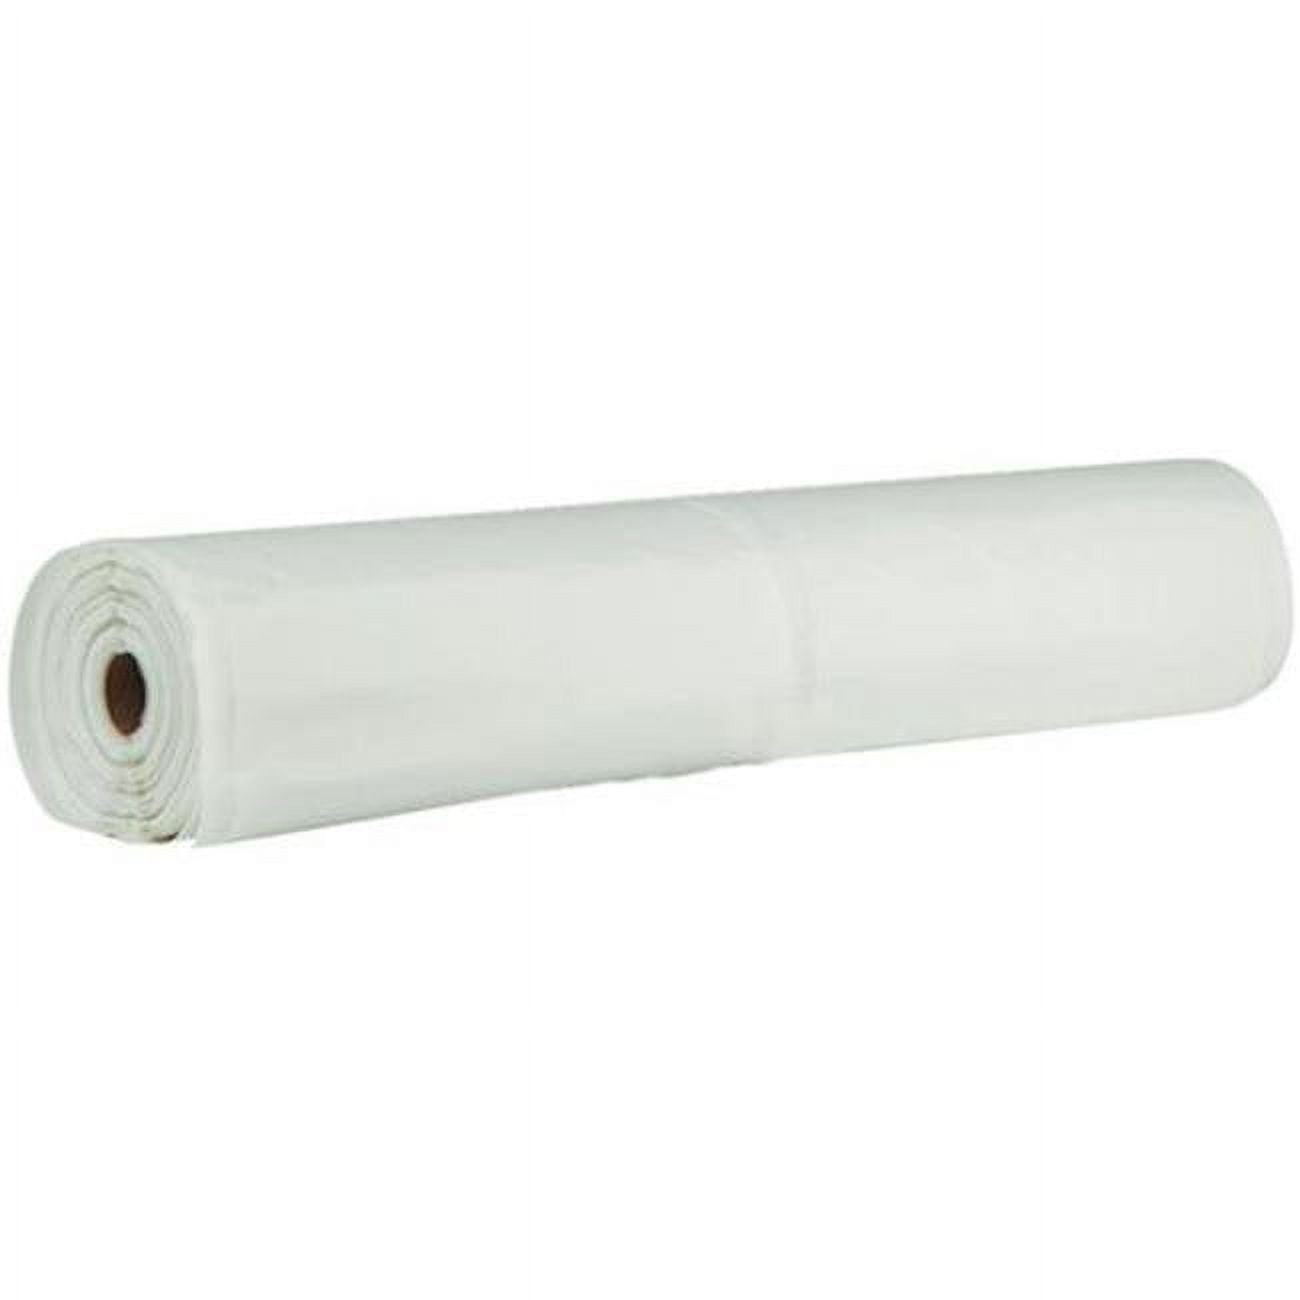 Picture of Berry Plastics 54060 6 Mil 24 x 100 ft. Construction Plastic Sheeting Film-Gard